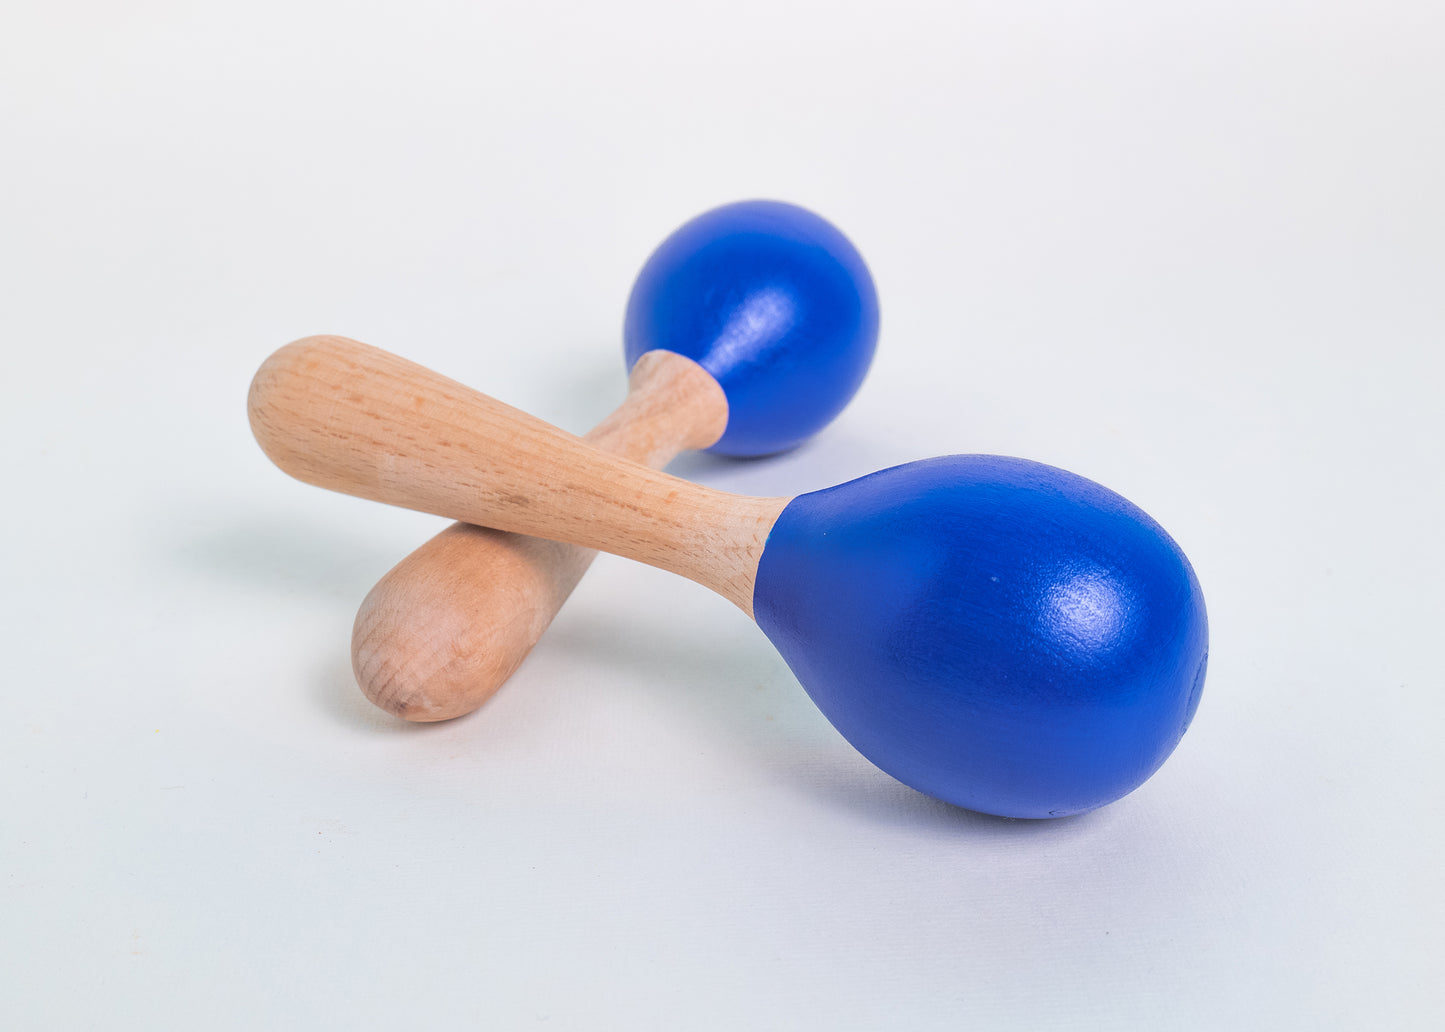 Wooden Maracas (2pcs) for Toddlers - Natural & Musical Toy